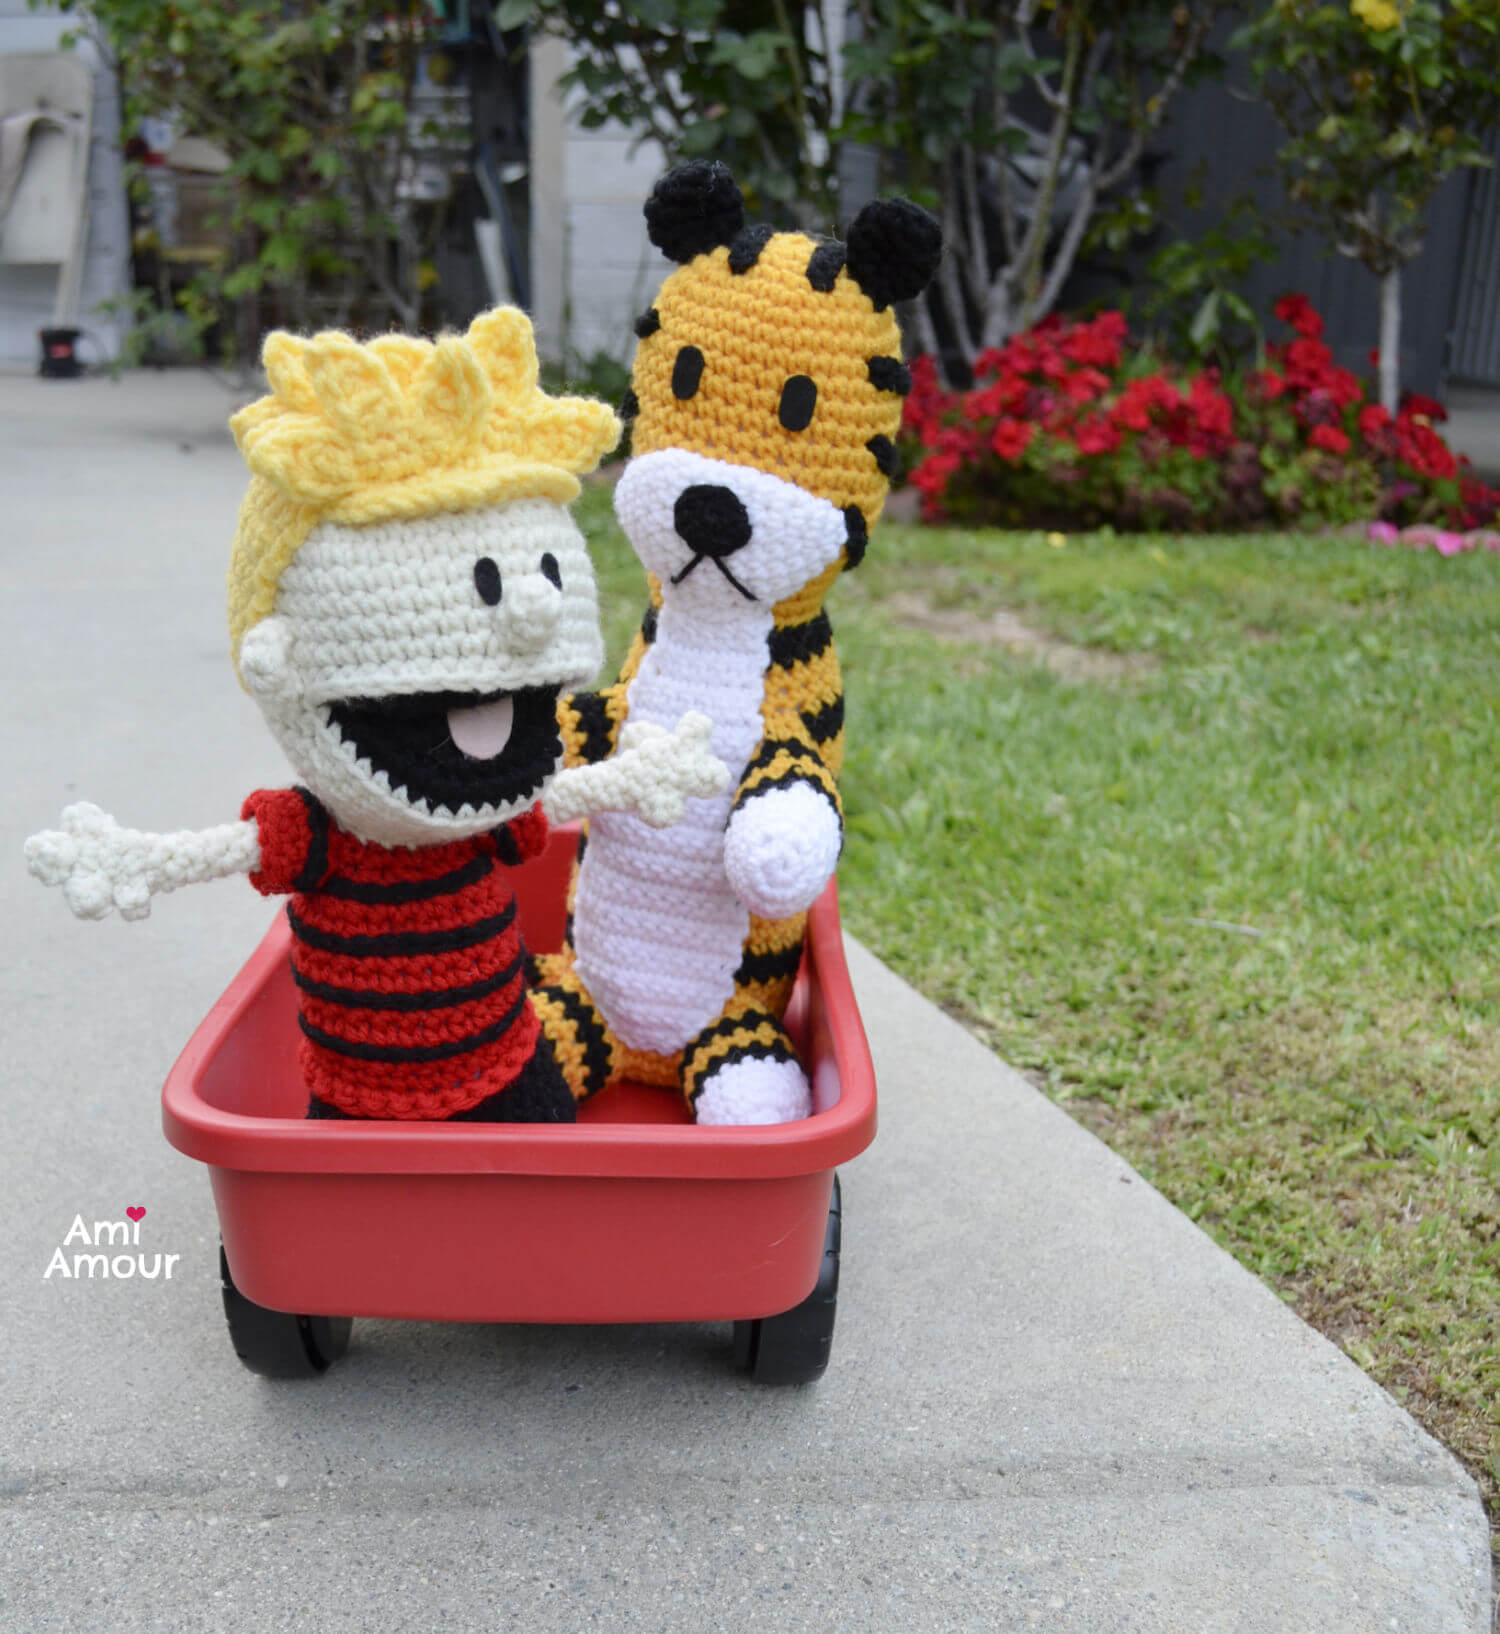 crochet Calvin and Hobbes in their red wagon